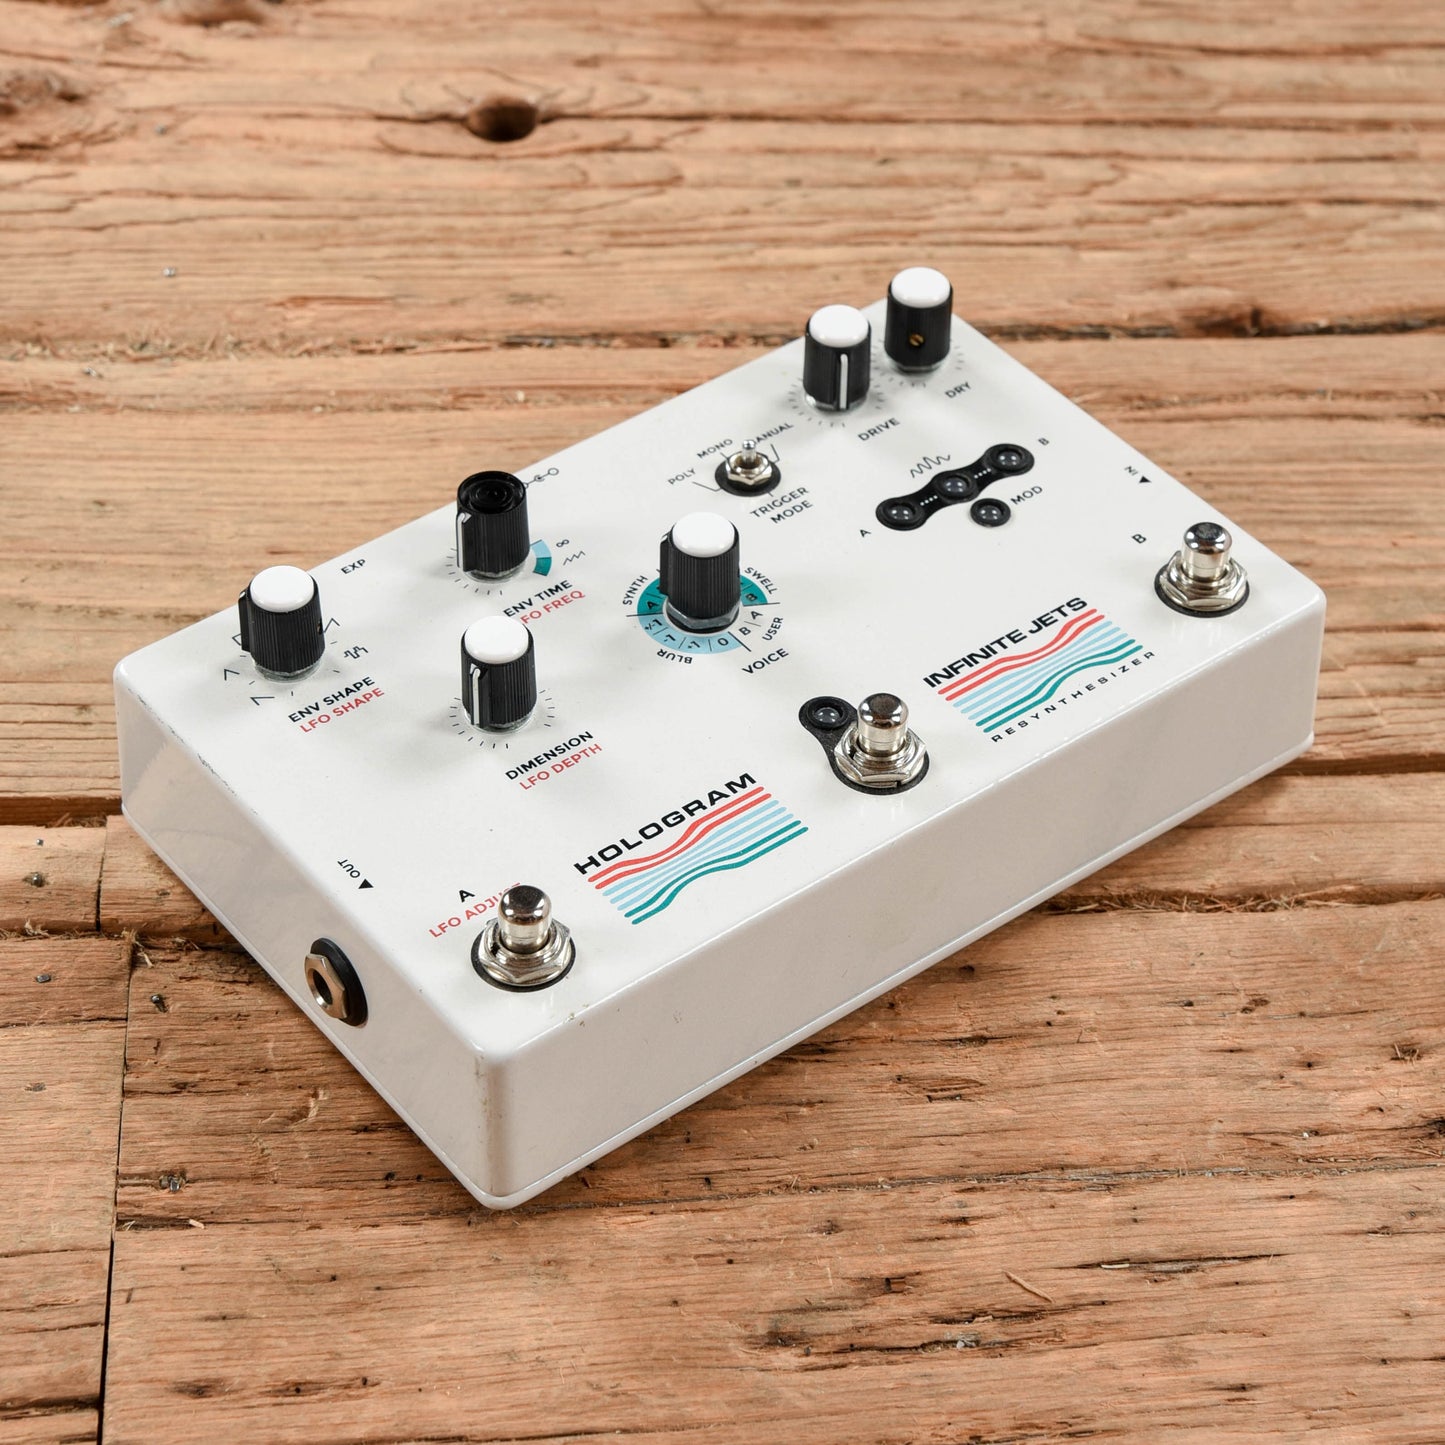 Hologram Electronics Infinite Jets Effects and Pedals / Multi-Effect Unit